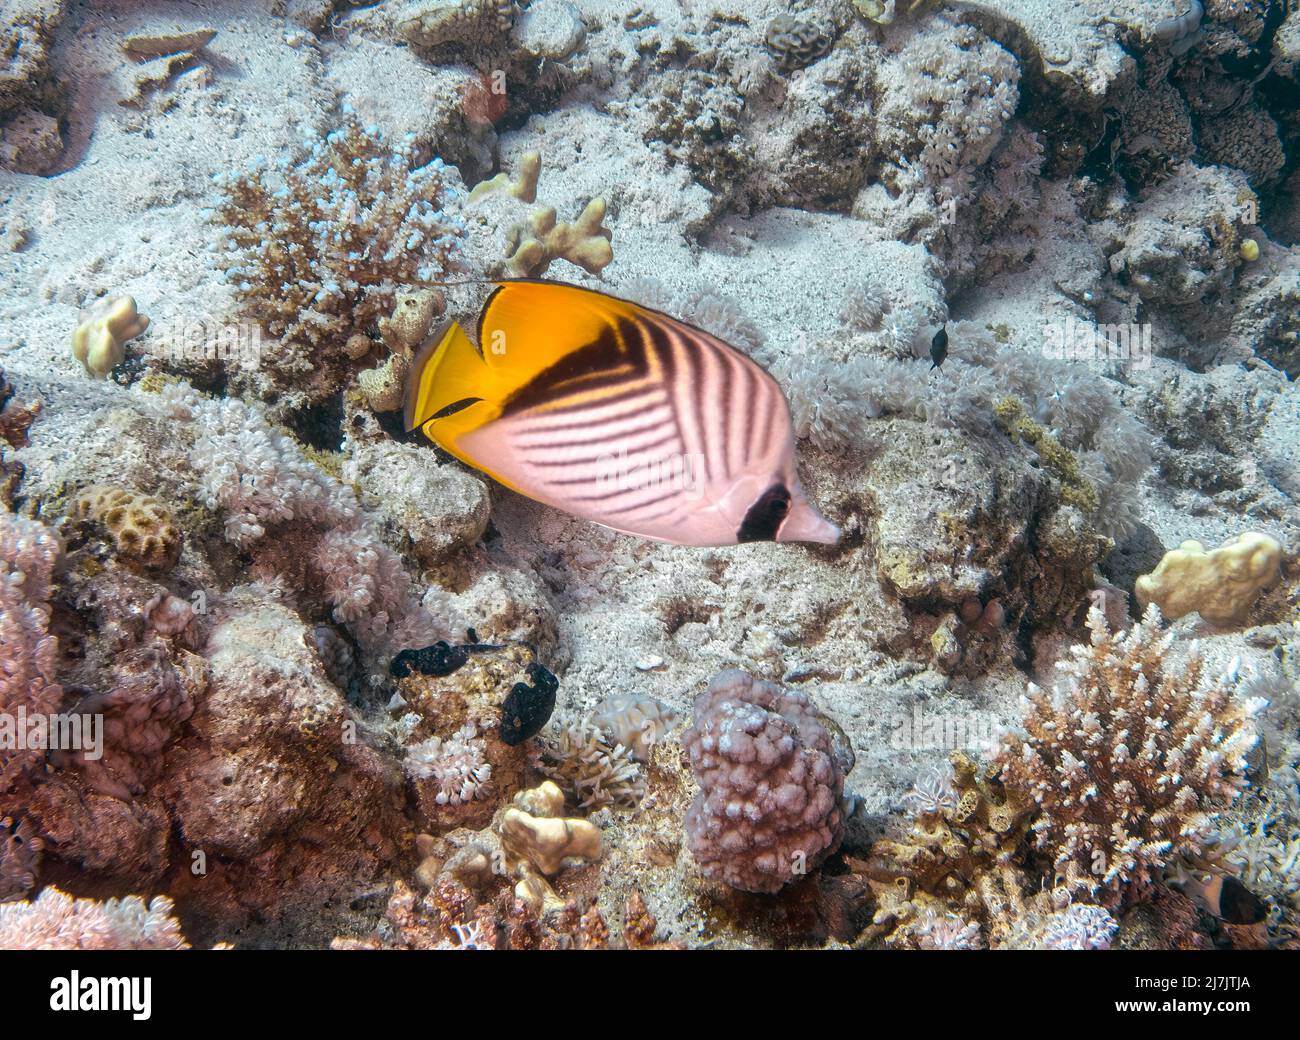 A Threadfin Butterflyfish (Chaetodon auriga) in the Red Sea, Egypt Stock Photo